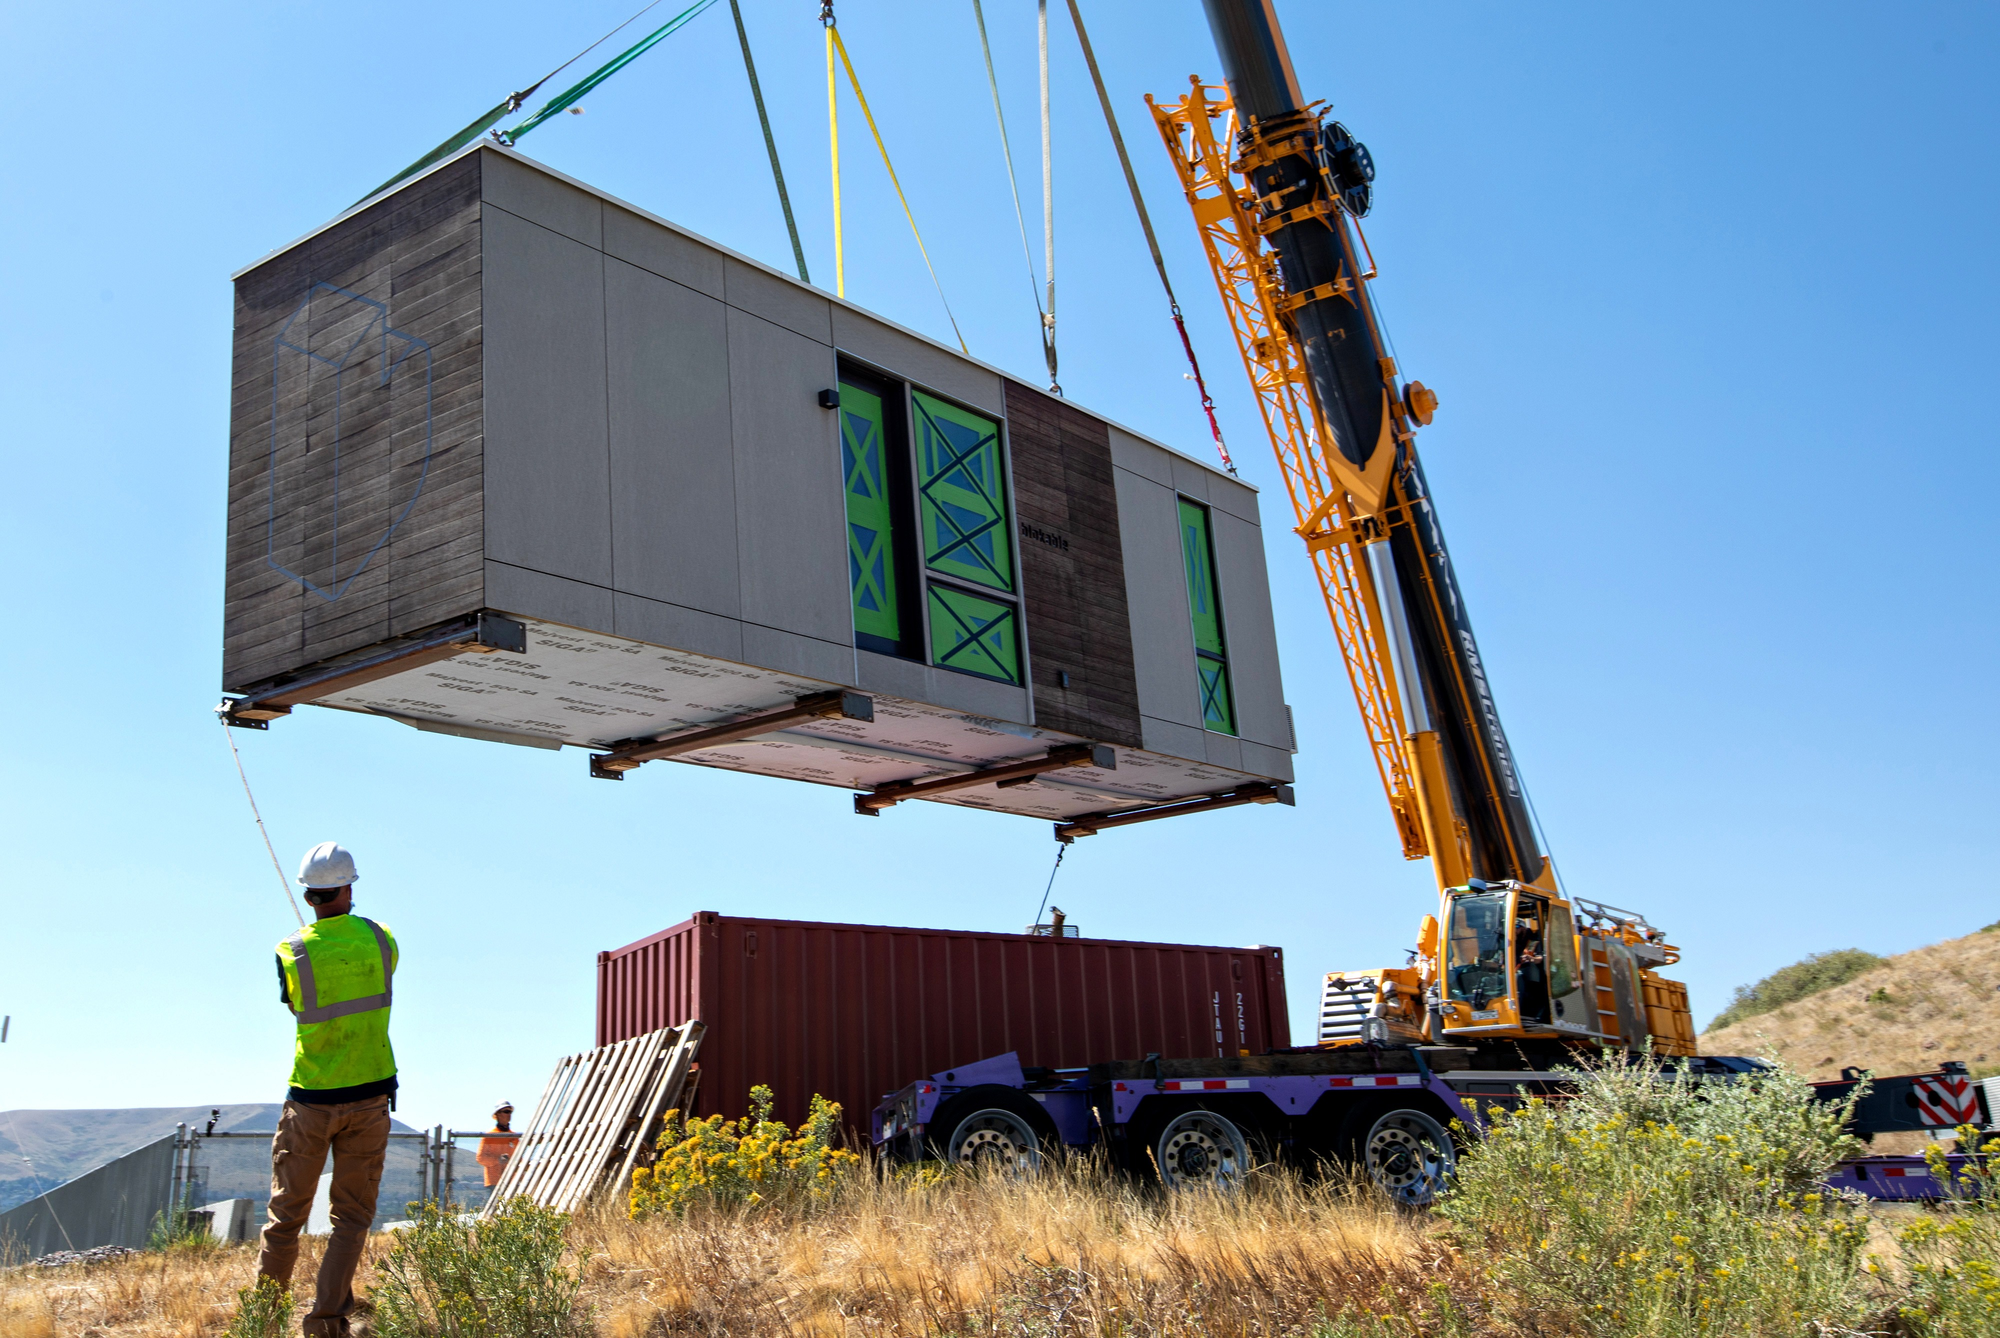 A Blok modular apartment unit is installed at the NREL Research Block.